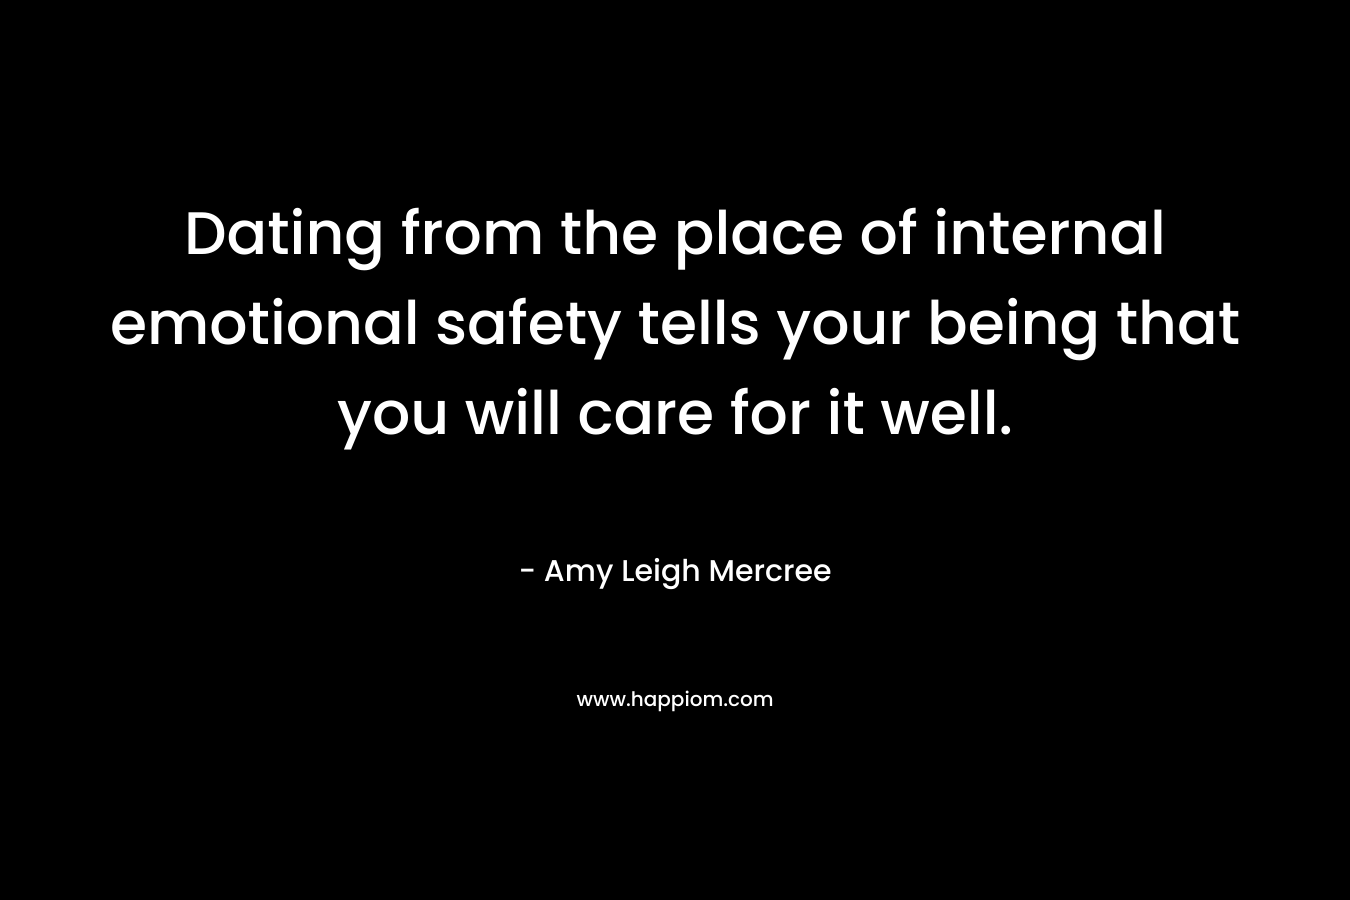 Dating from the place of internal emotional safety tells your being that you will care for it well. – Amy Leigh Mercree